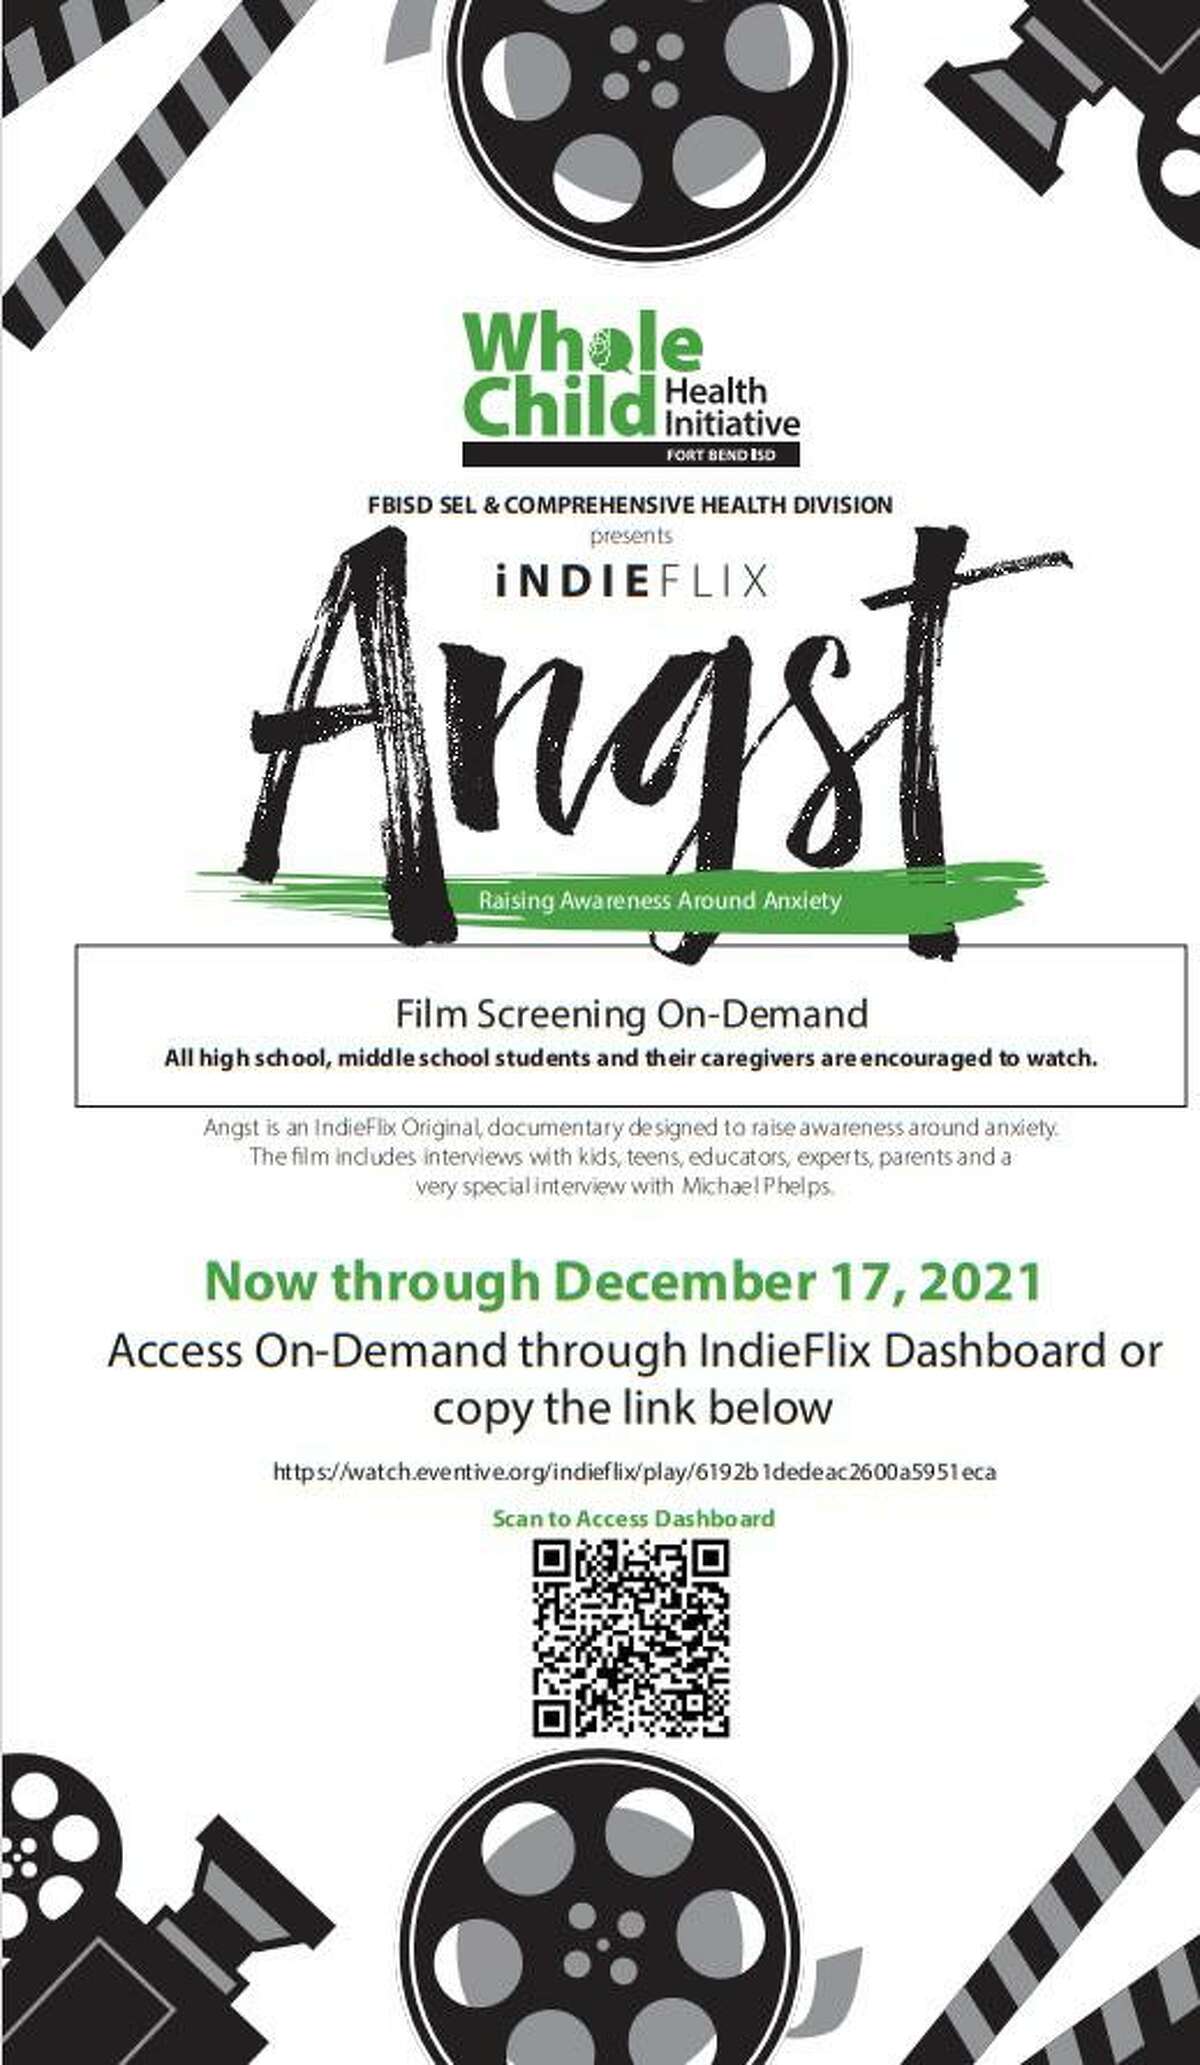 In an effort to raise awareness about anxiety among students, Fort Bend ISD is streaming the IndieFlix original documentary “Angst” through Friday, Dec. 17.